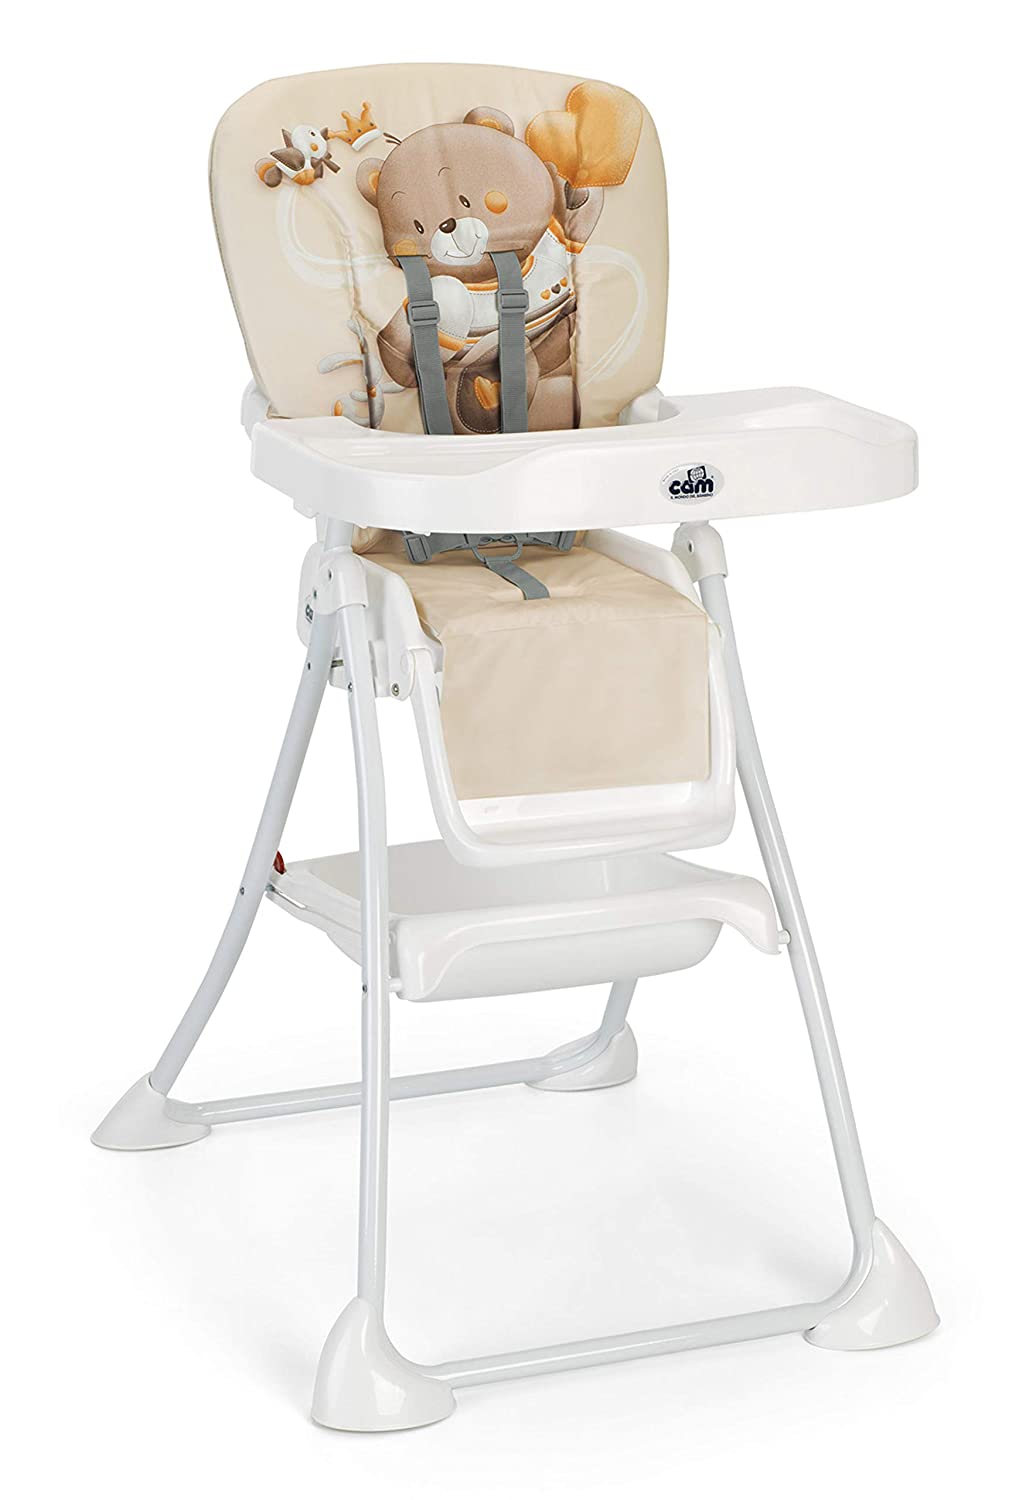 CAM Il Mondo del Bambino - art.S450/C240 - Miniplus high chairs - made in Italy - perfect from 6 to 36 months - bear